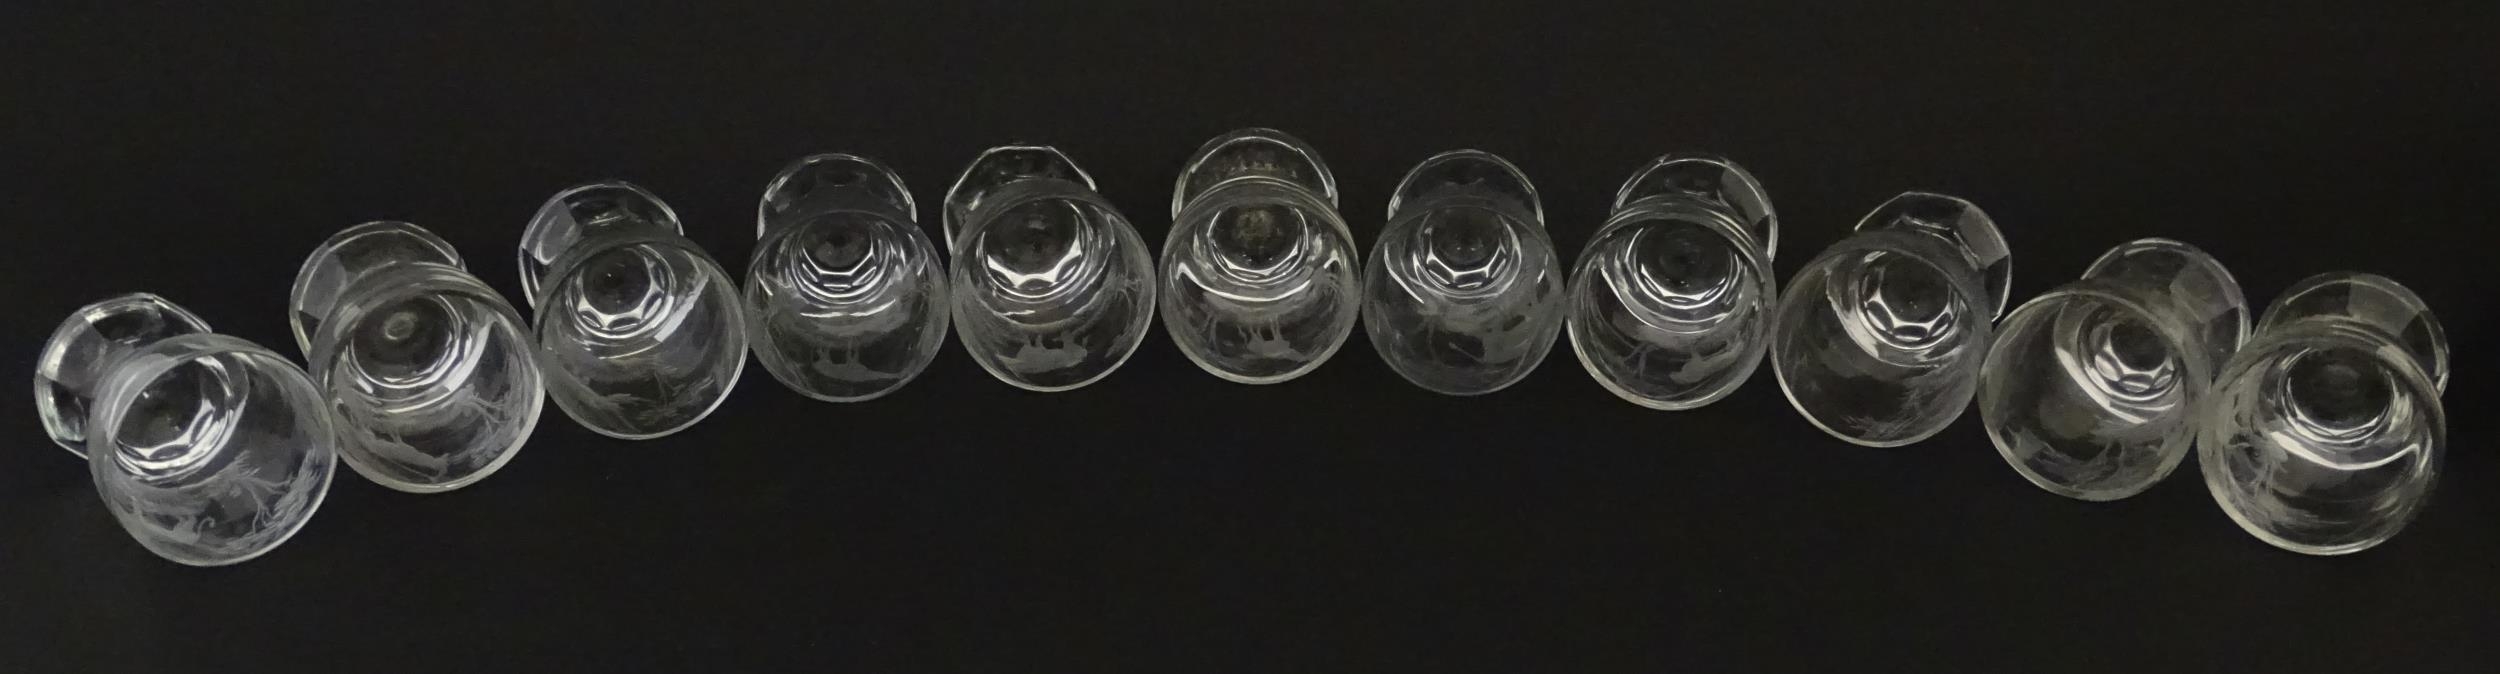 Rowland Ward sherry / liquor glasses with engraved Safari animal detail. Unsigned. Largest approx. - Image 26 of 26